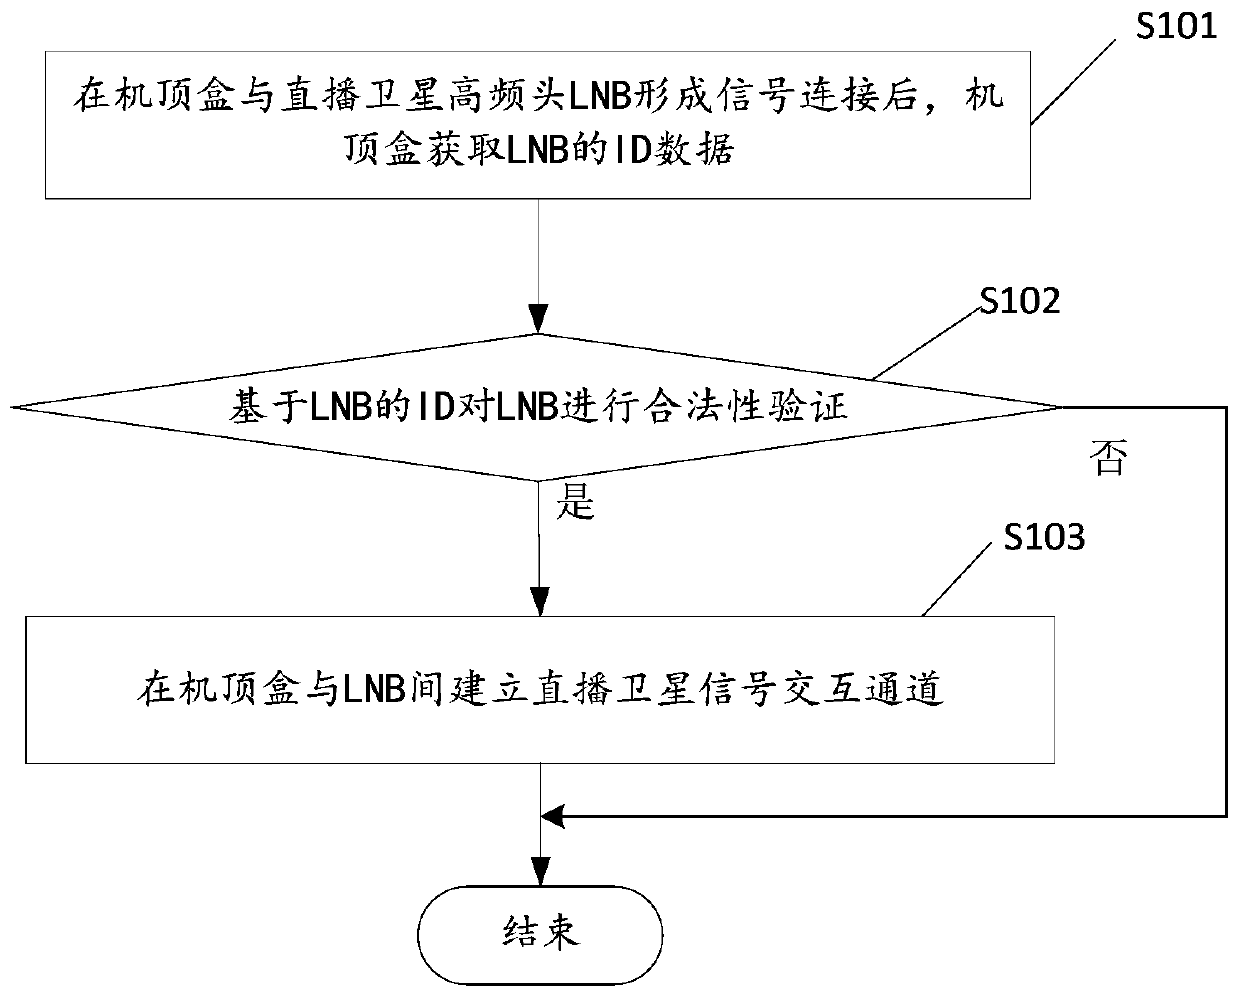 A method of live satellite TV interaction verification and LNB and system